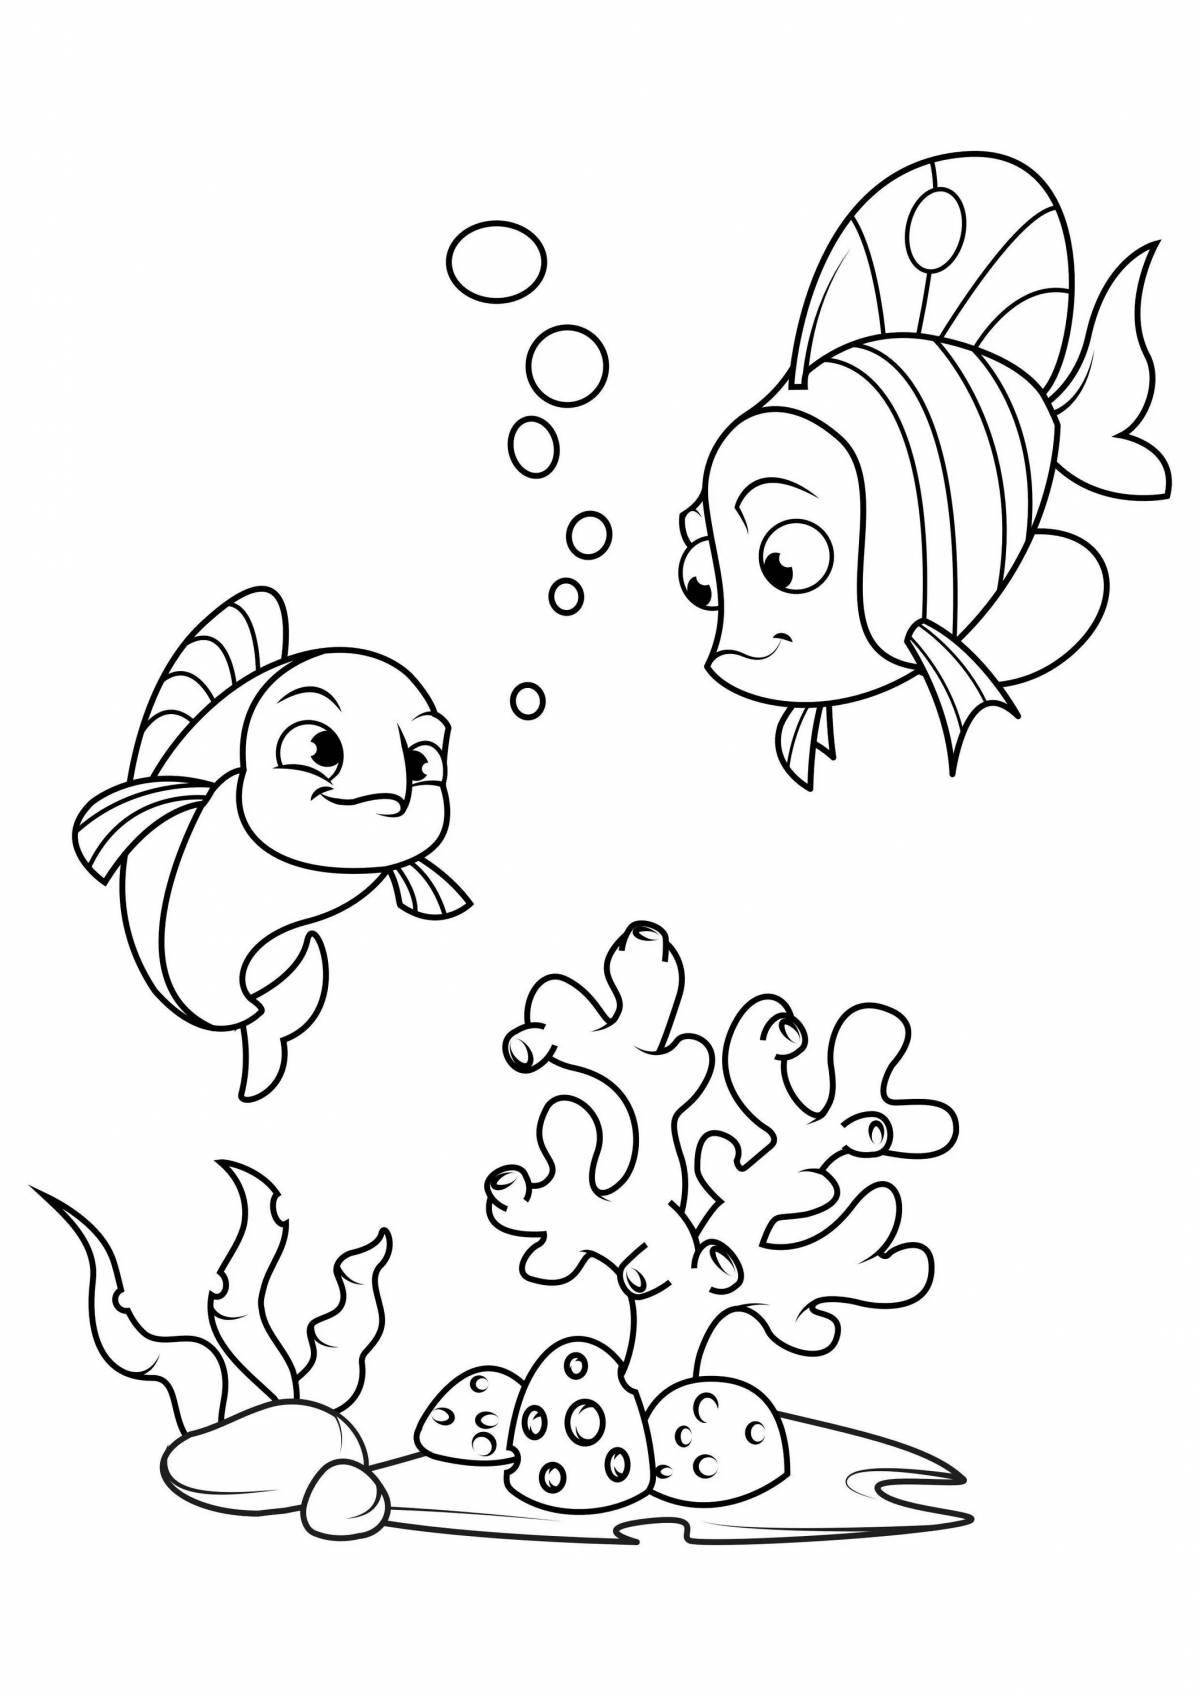 Colorful fish coloring for girls